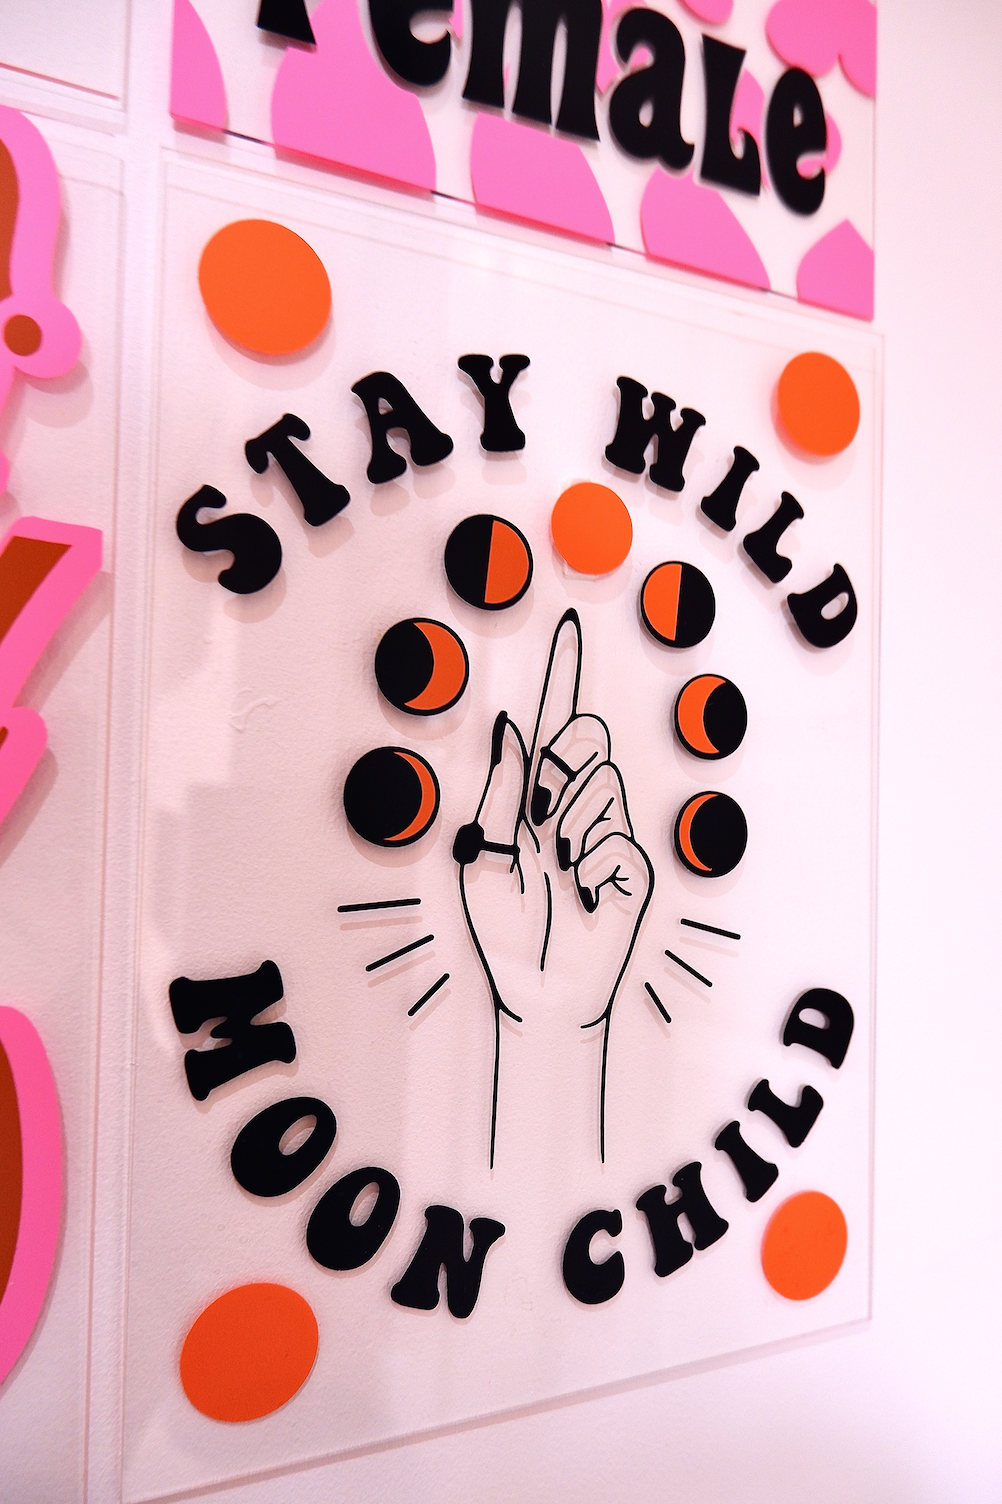 Stay wild moon child clear acrylic vinyl poster plaque